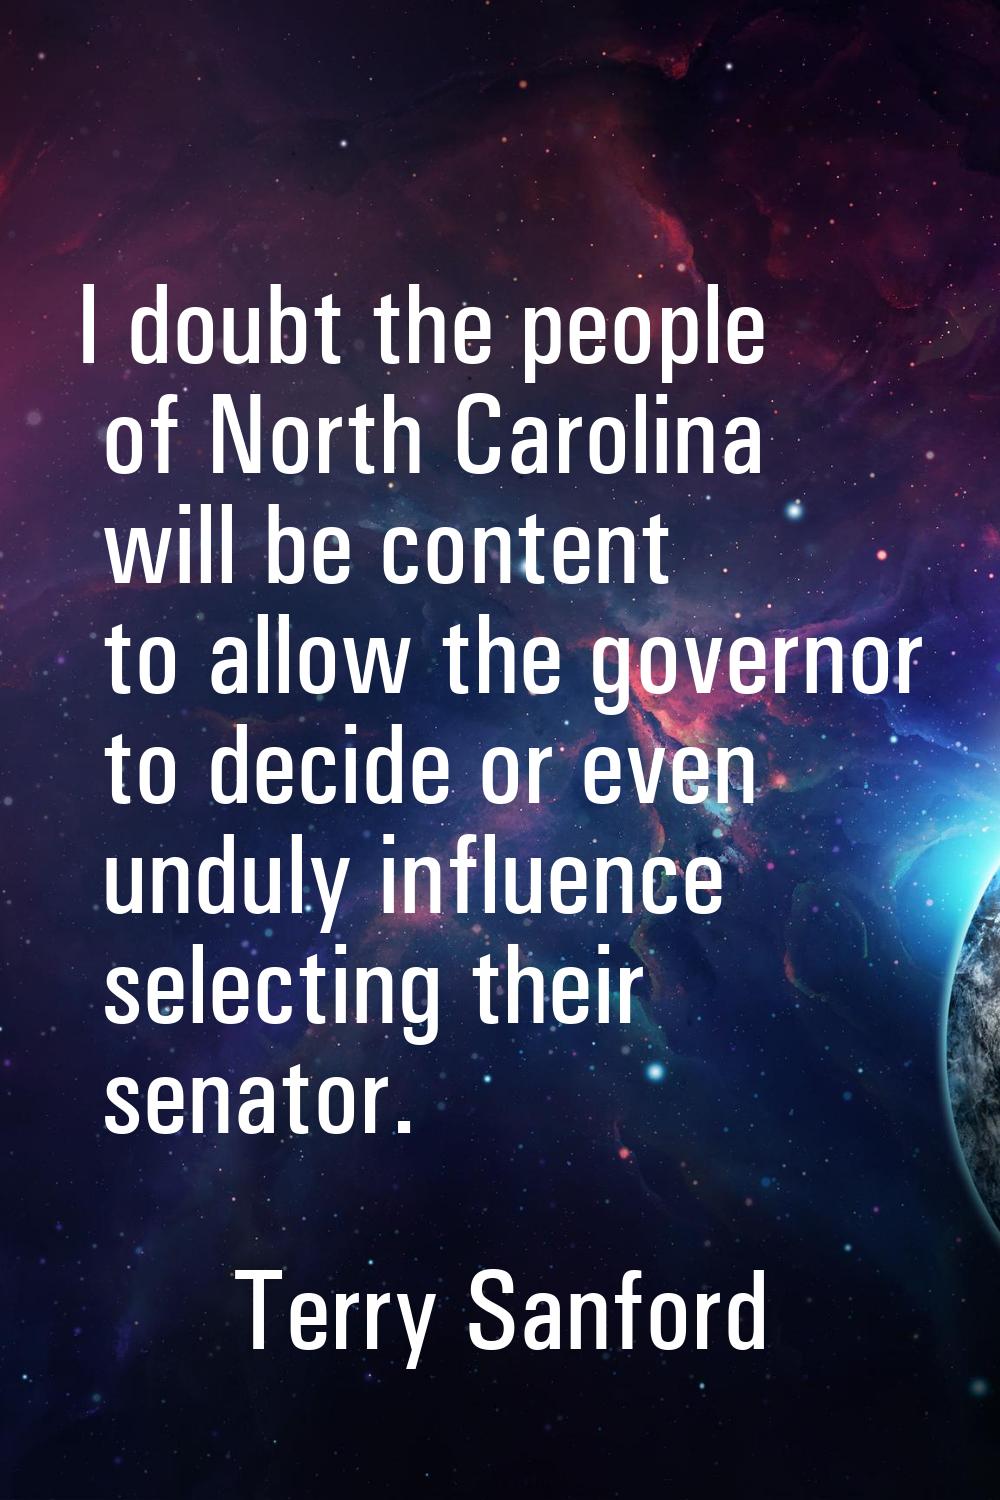 I doubt the people of North Carolina will be content to allow the governor to decide or even unduly